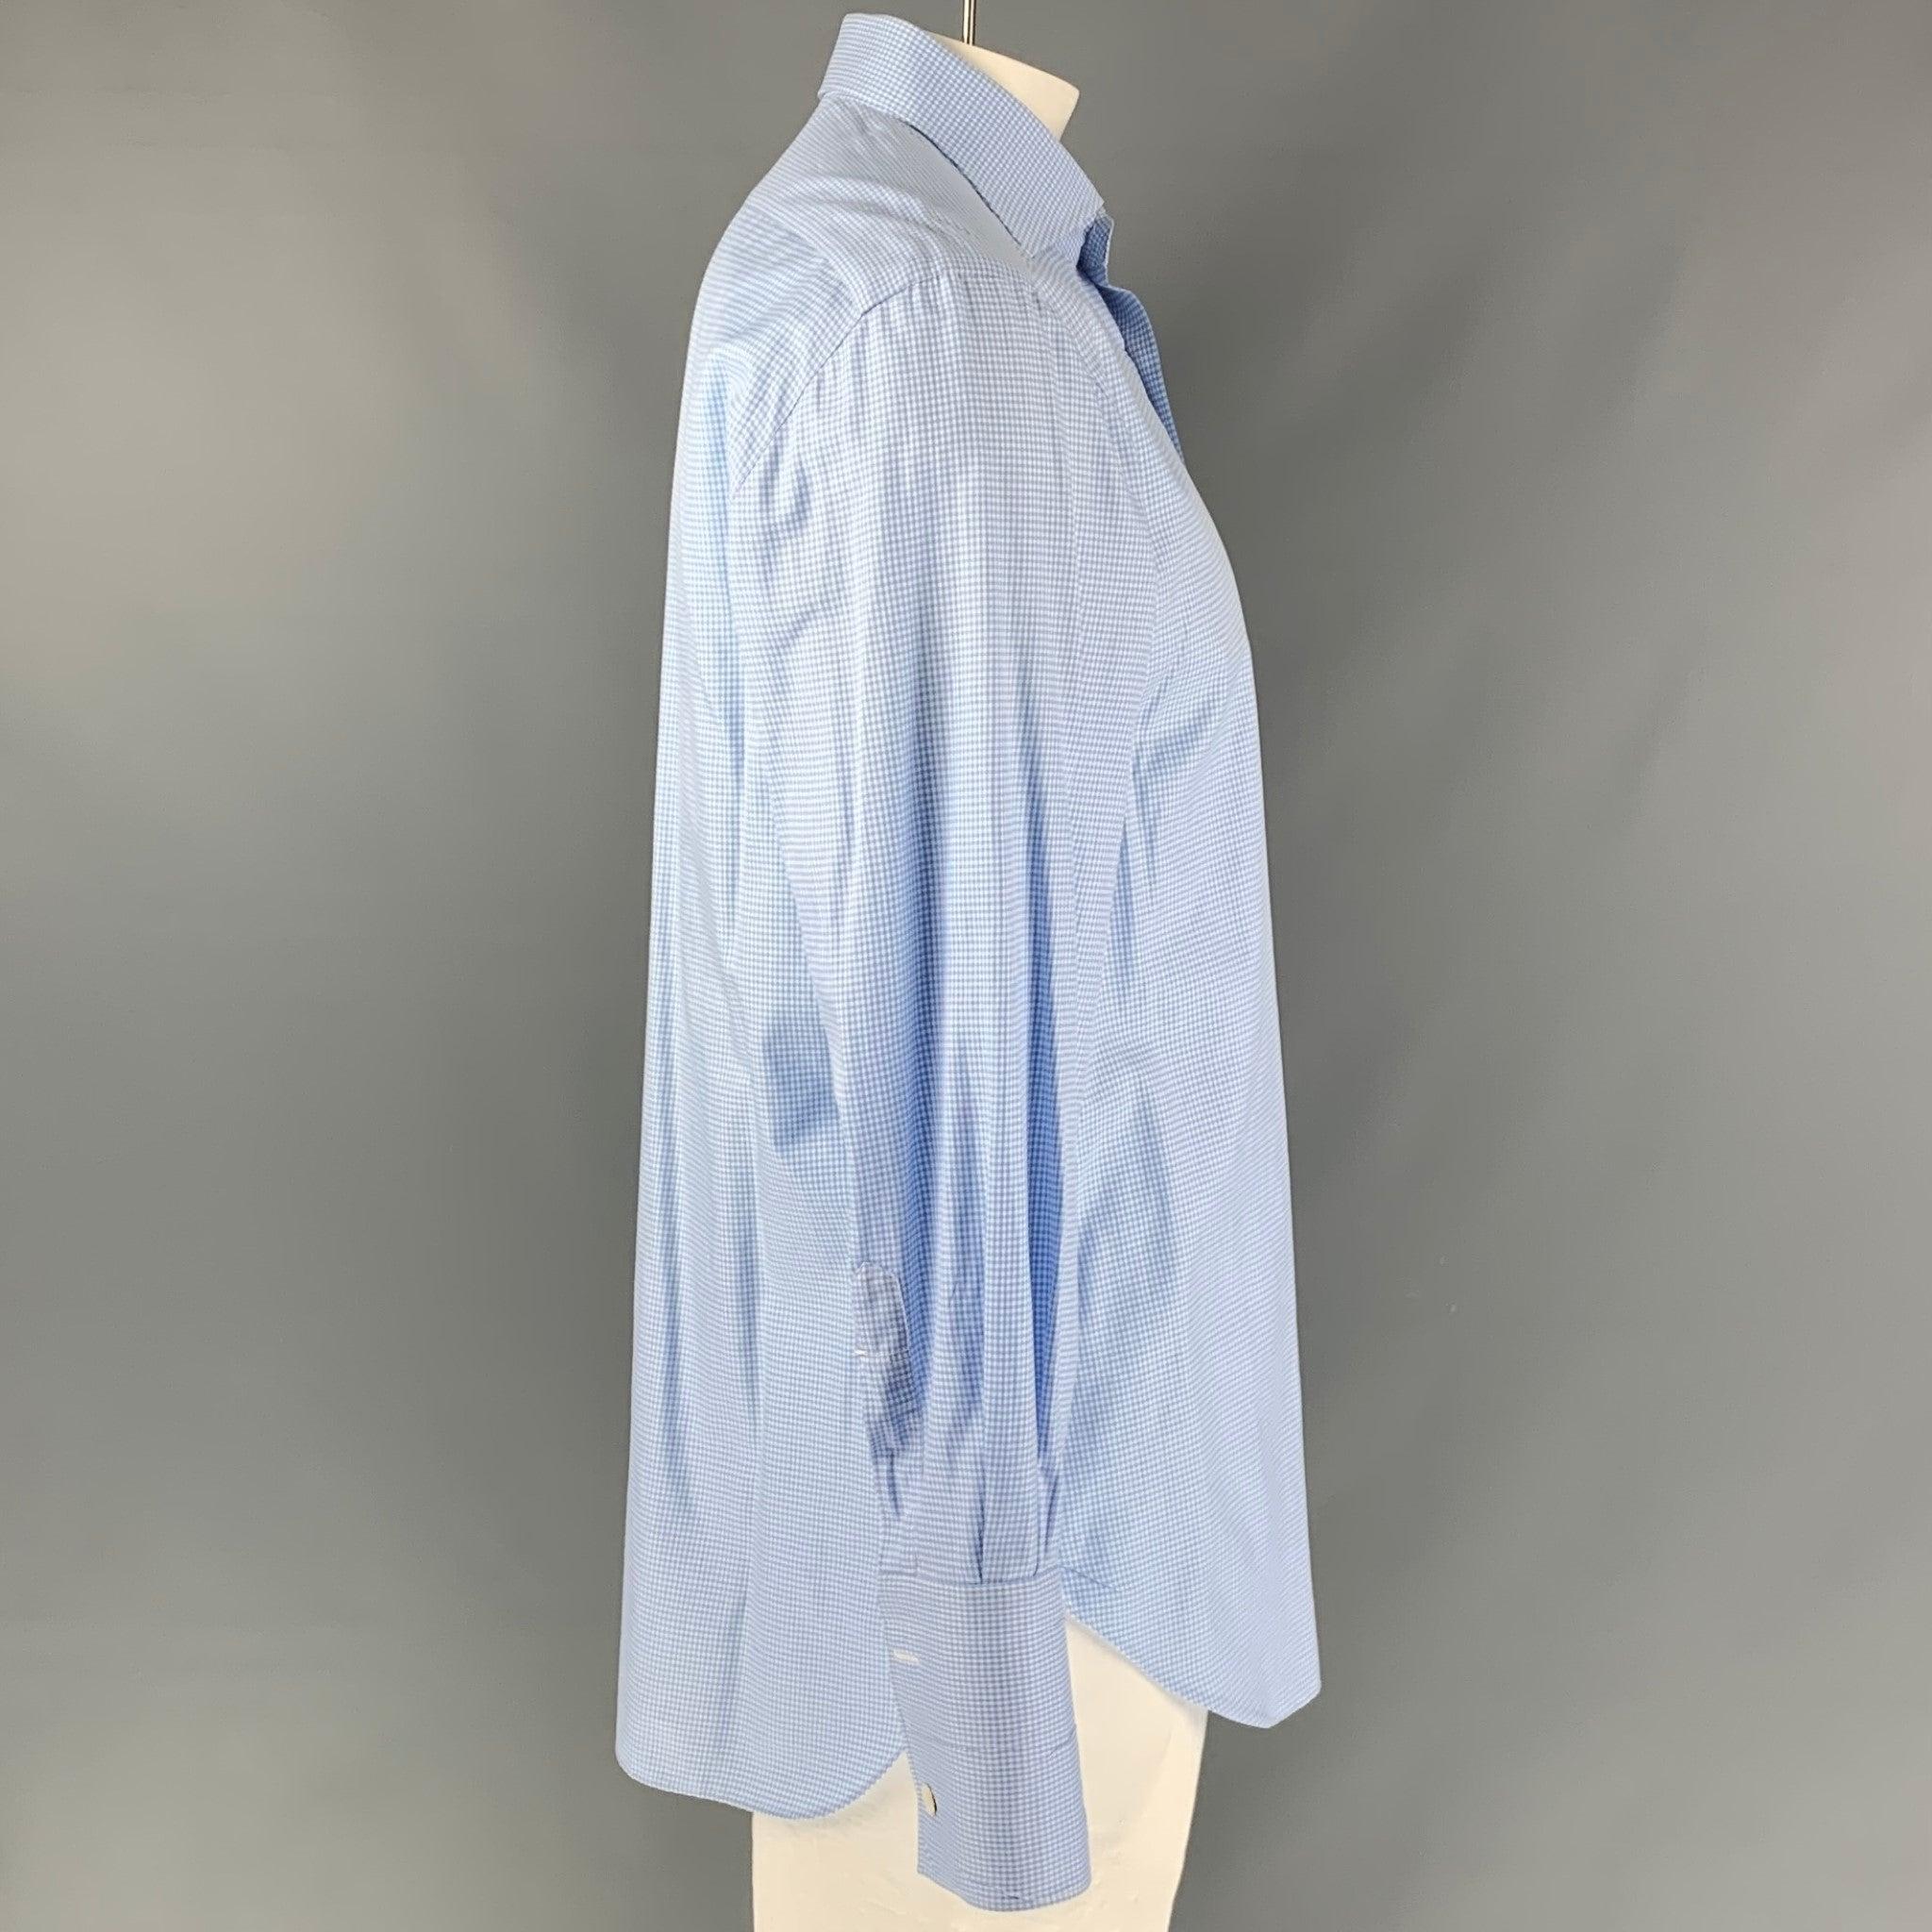 KITON long sleeve shirt comes in white and light blue gingham cotton featuring spread collar, and button up closure. Made in Italy.Excellent Pre-Owned Condition.  

Marked:   43-17 

Measurements: 
 
Shoulder: 20 inches Chest: 48 inches Sleeve: 27